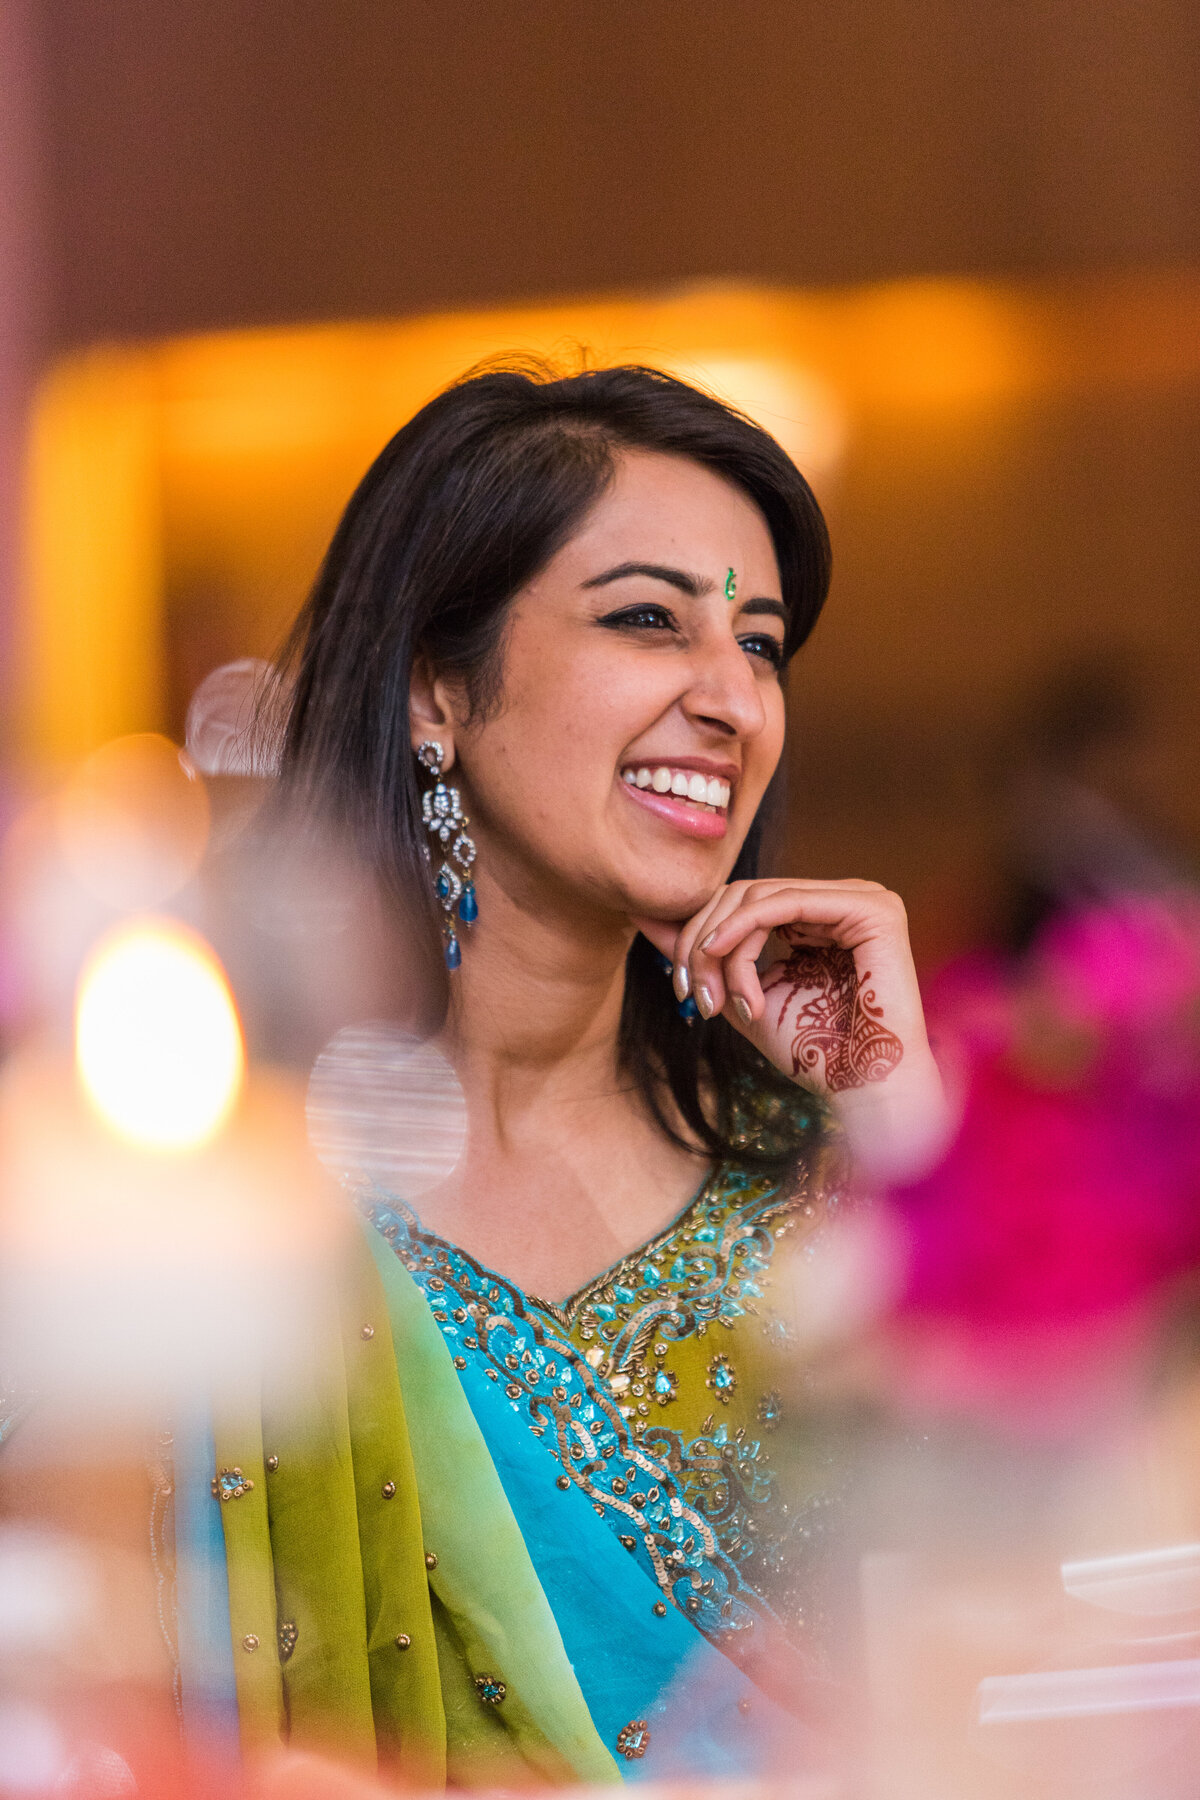 maha_studios_wedding_photography_chicago_new_york_california_sophisticated_and_vibrant_photography_honoring_modern_south_asian_and_multicultural_weddings84